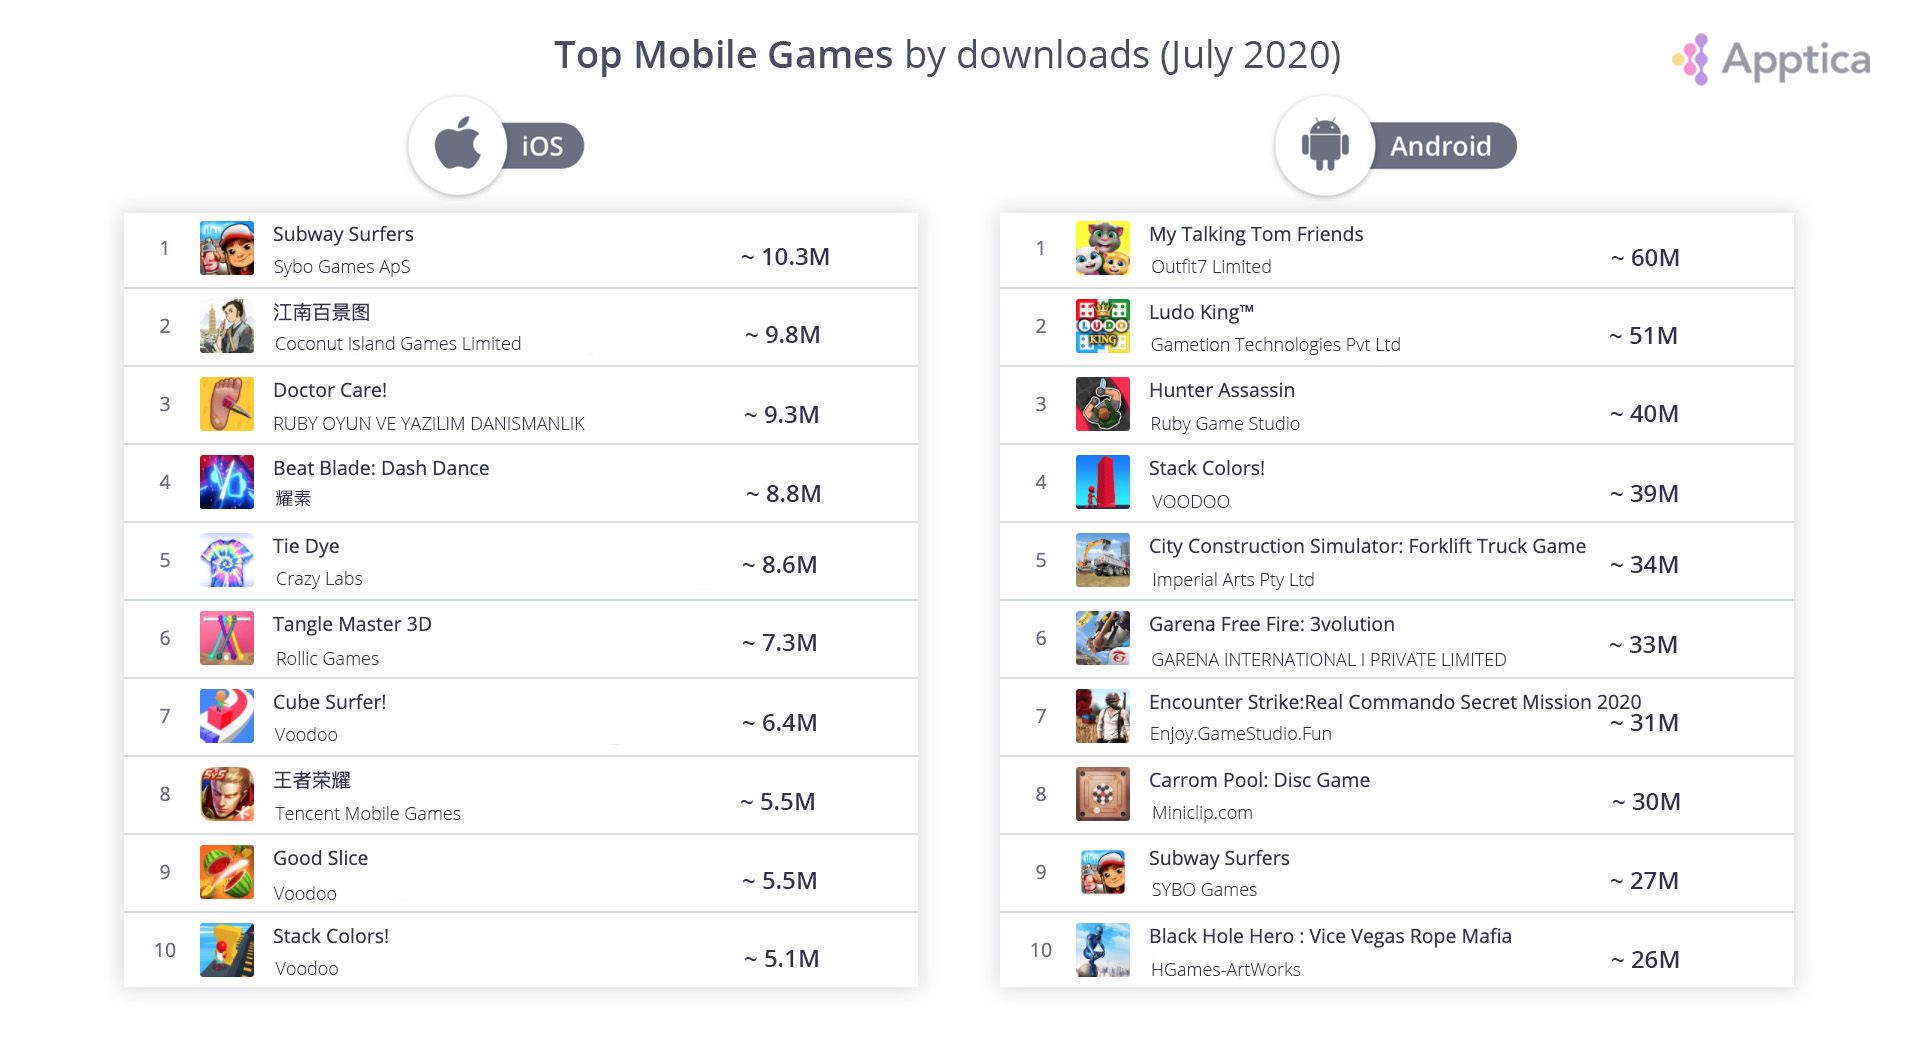 5 Most Downloaded Mobile Games of 2020